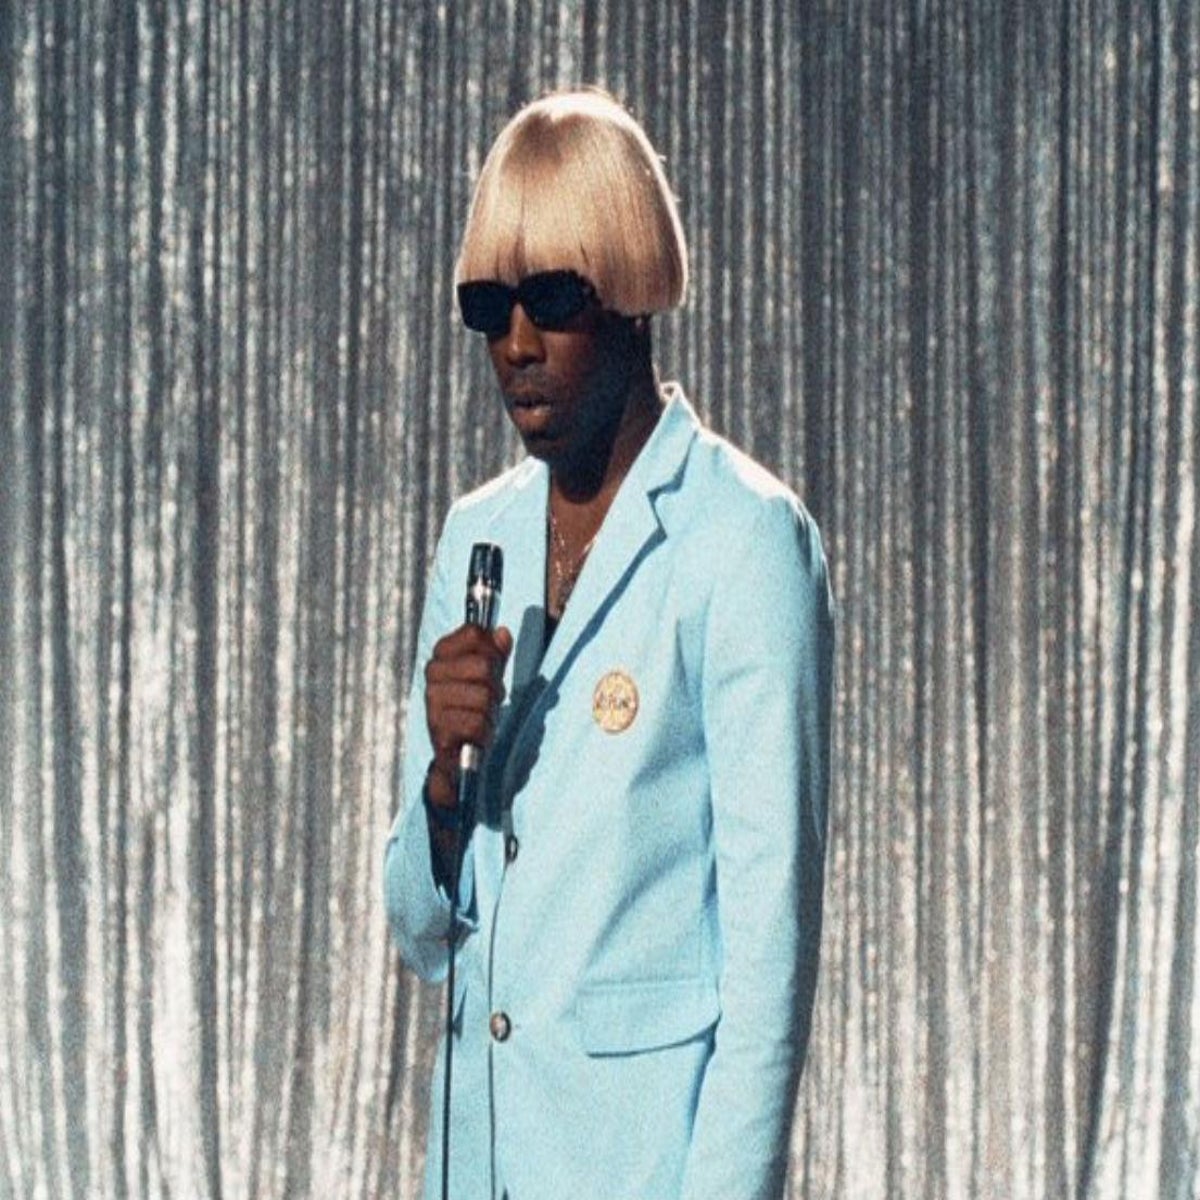 Everything We Learned From Tyler, the Creator's First Performance of 'IGOR